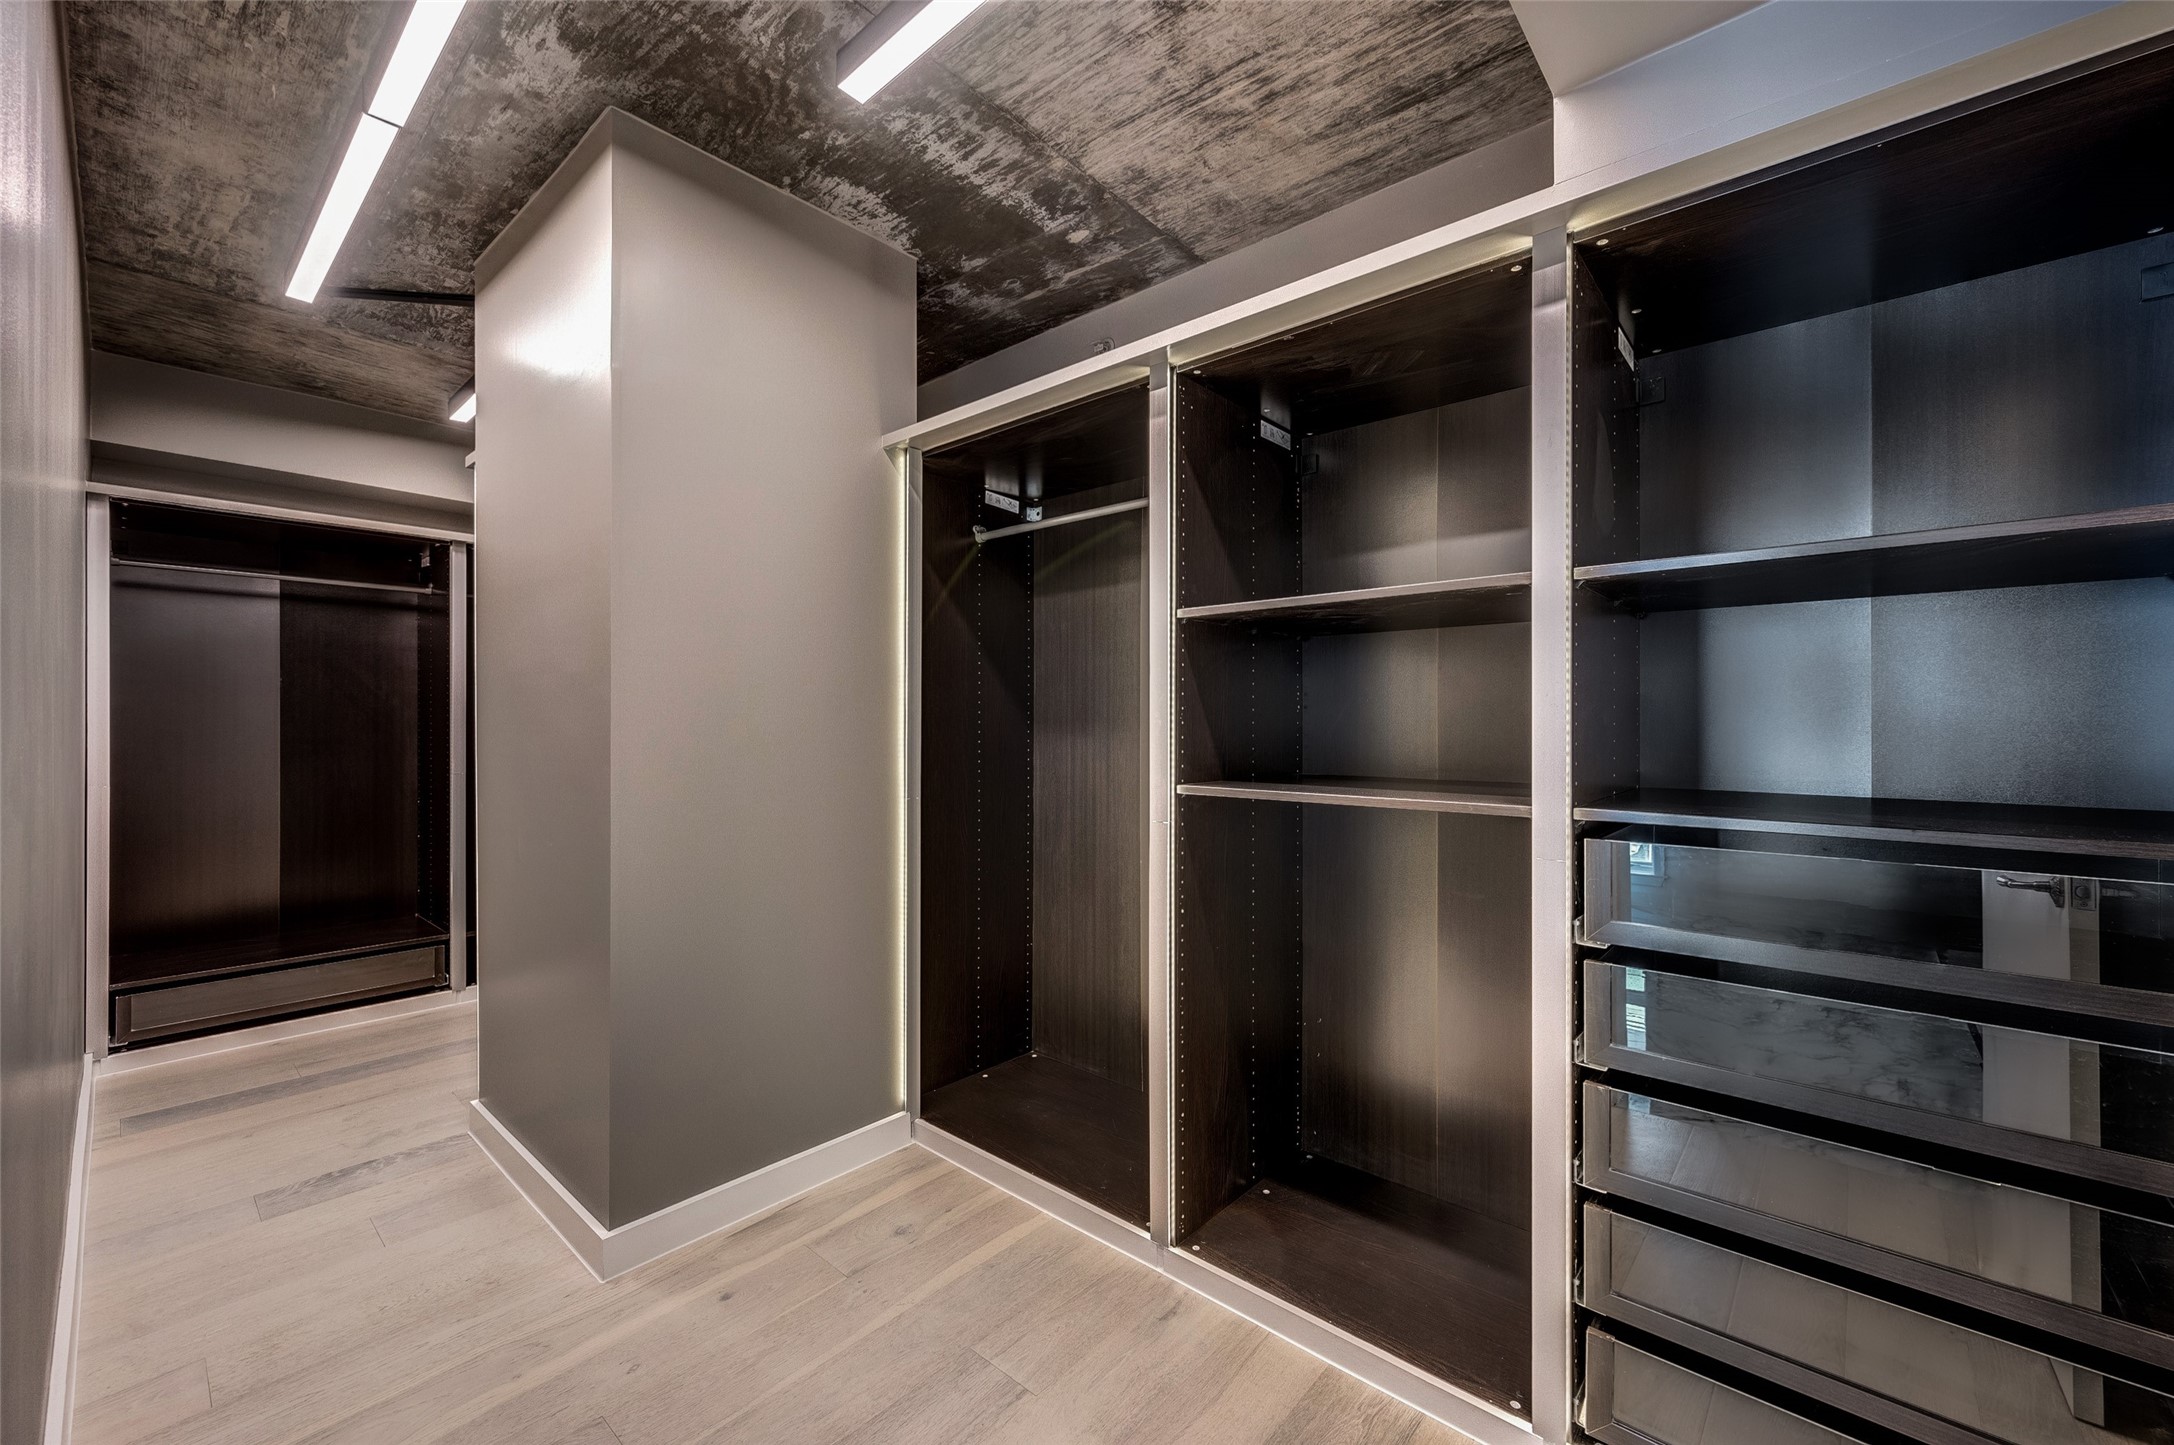 Designer closet similar to your favorite store. All customized with LED encasement lighting.